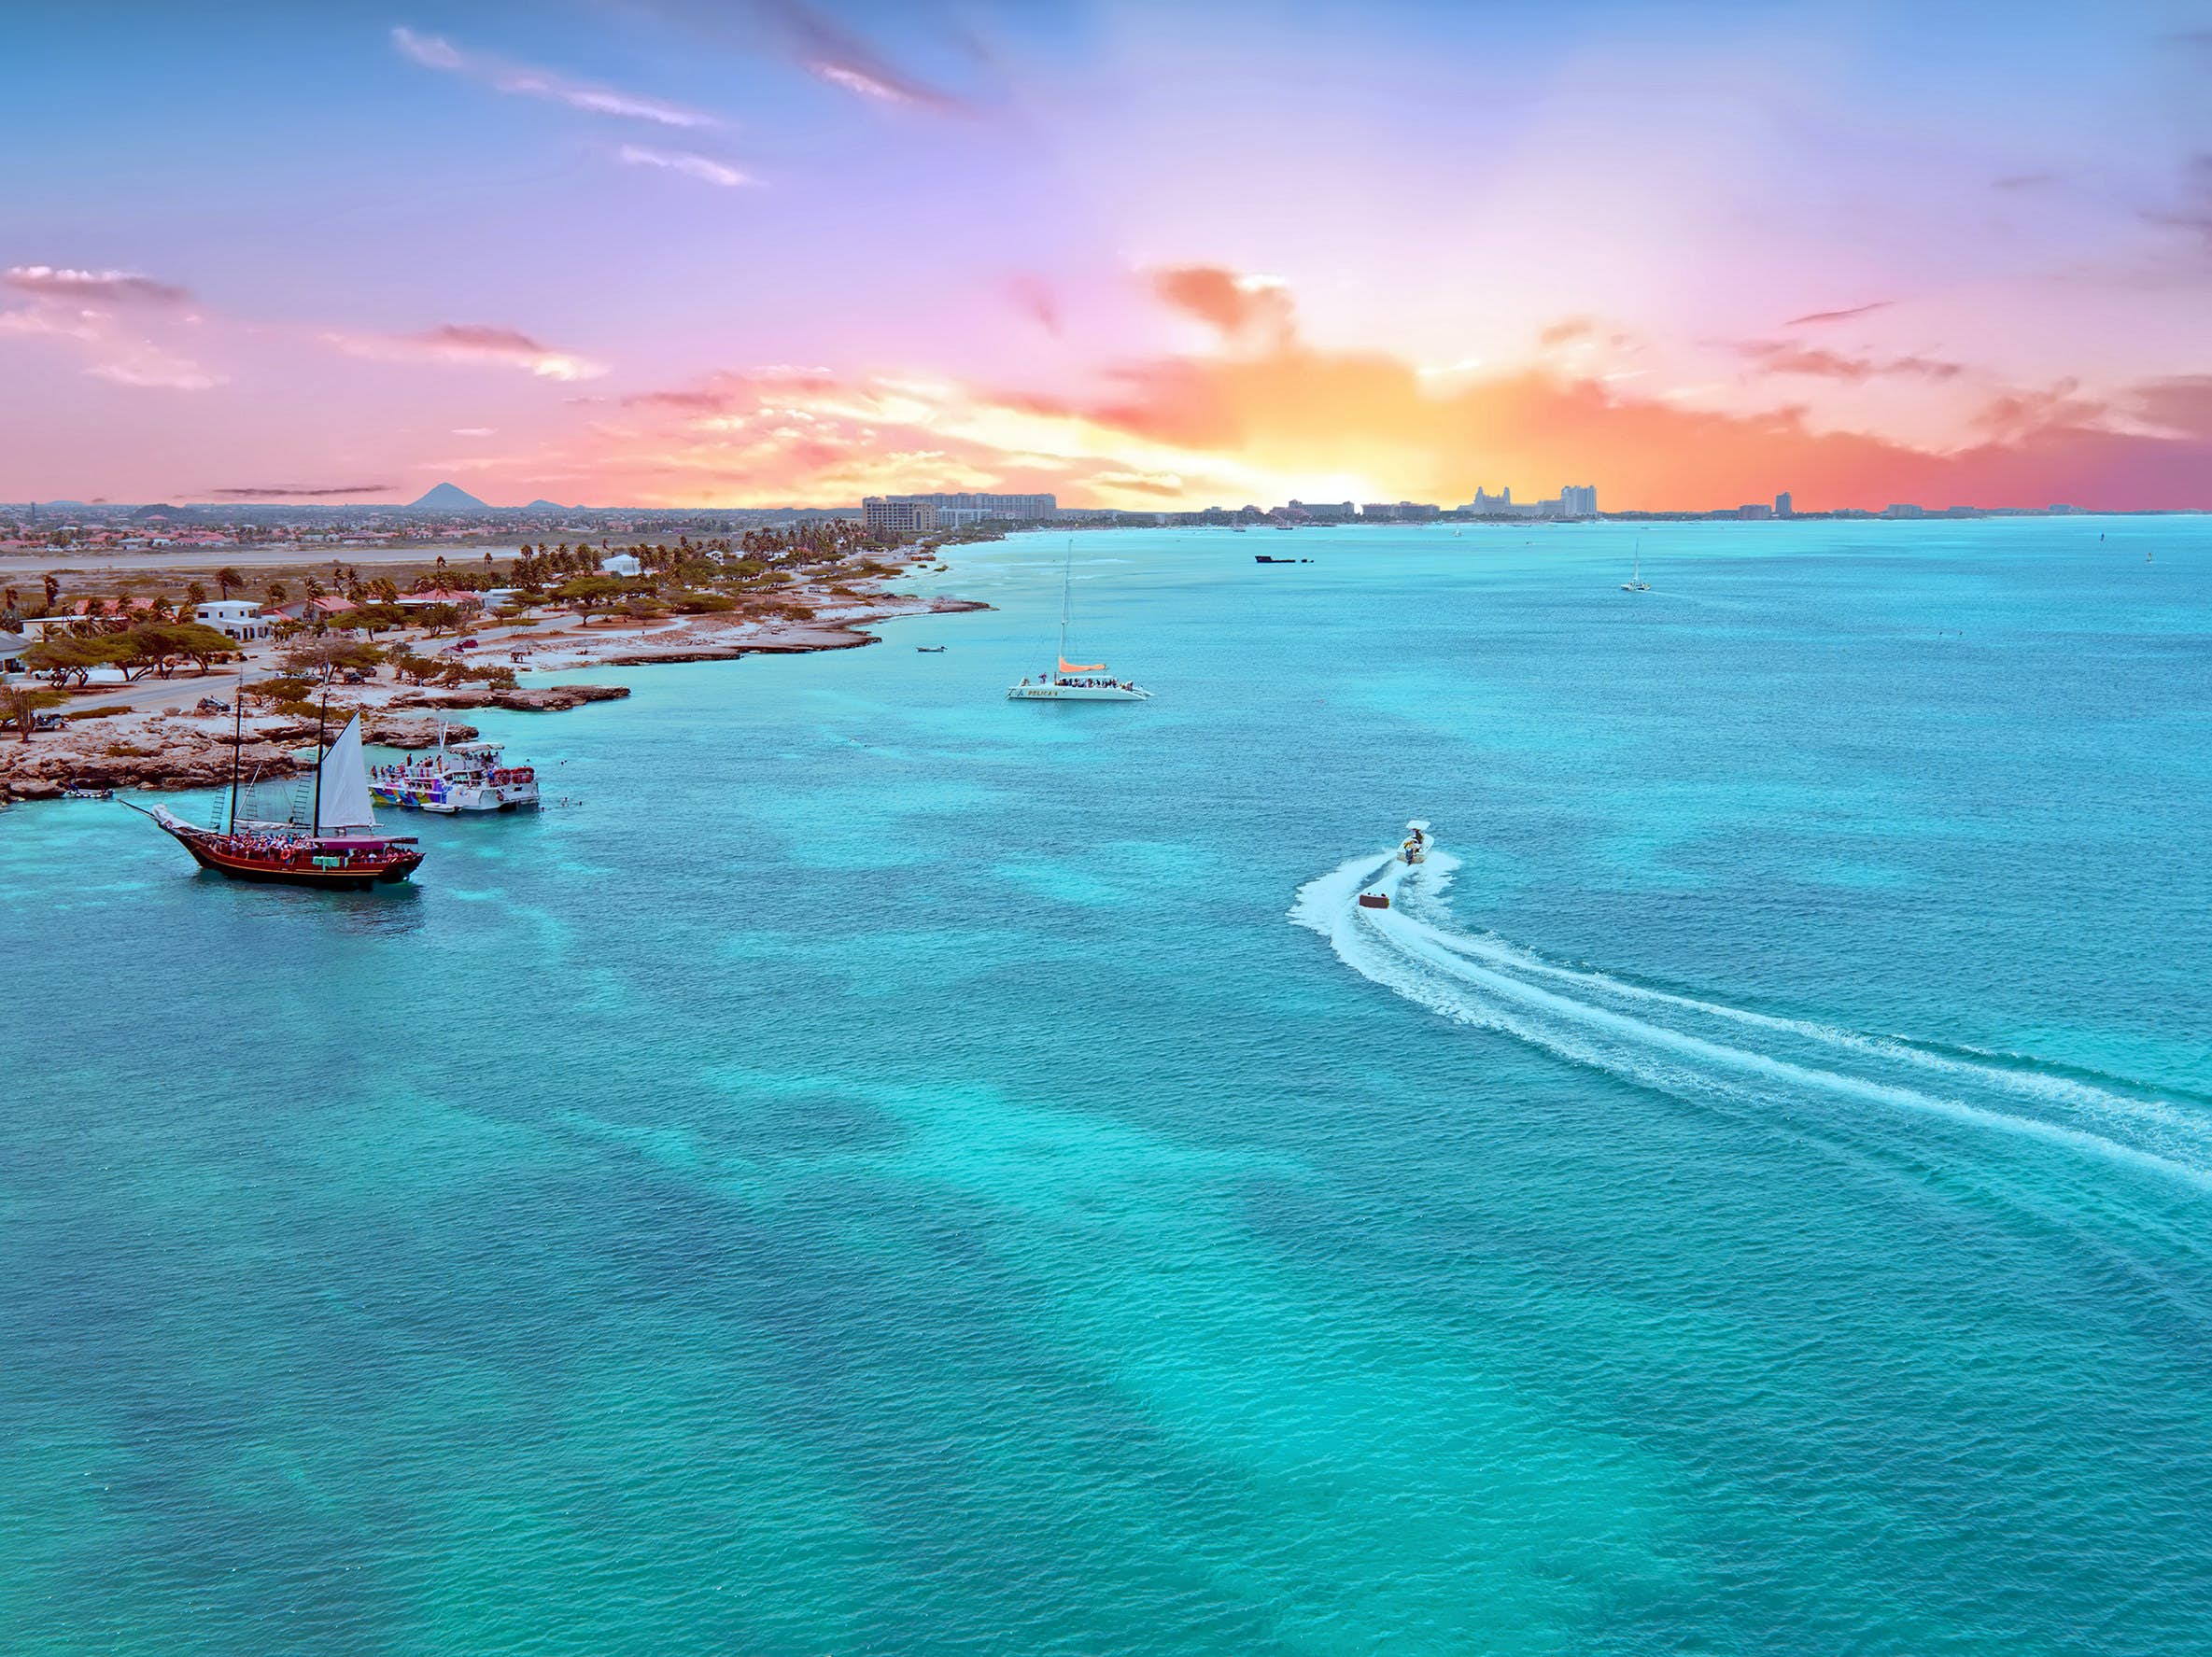 Aruba your way: tips for lovers, thrill seekers, foodies and more - Lonely Planet